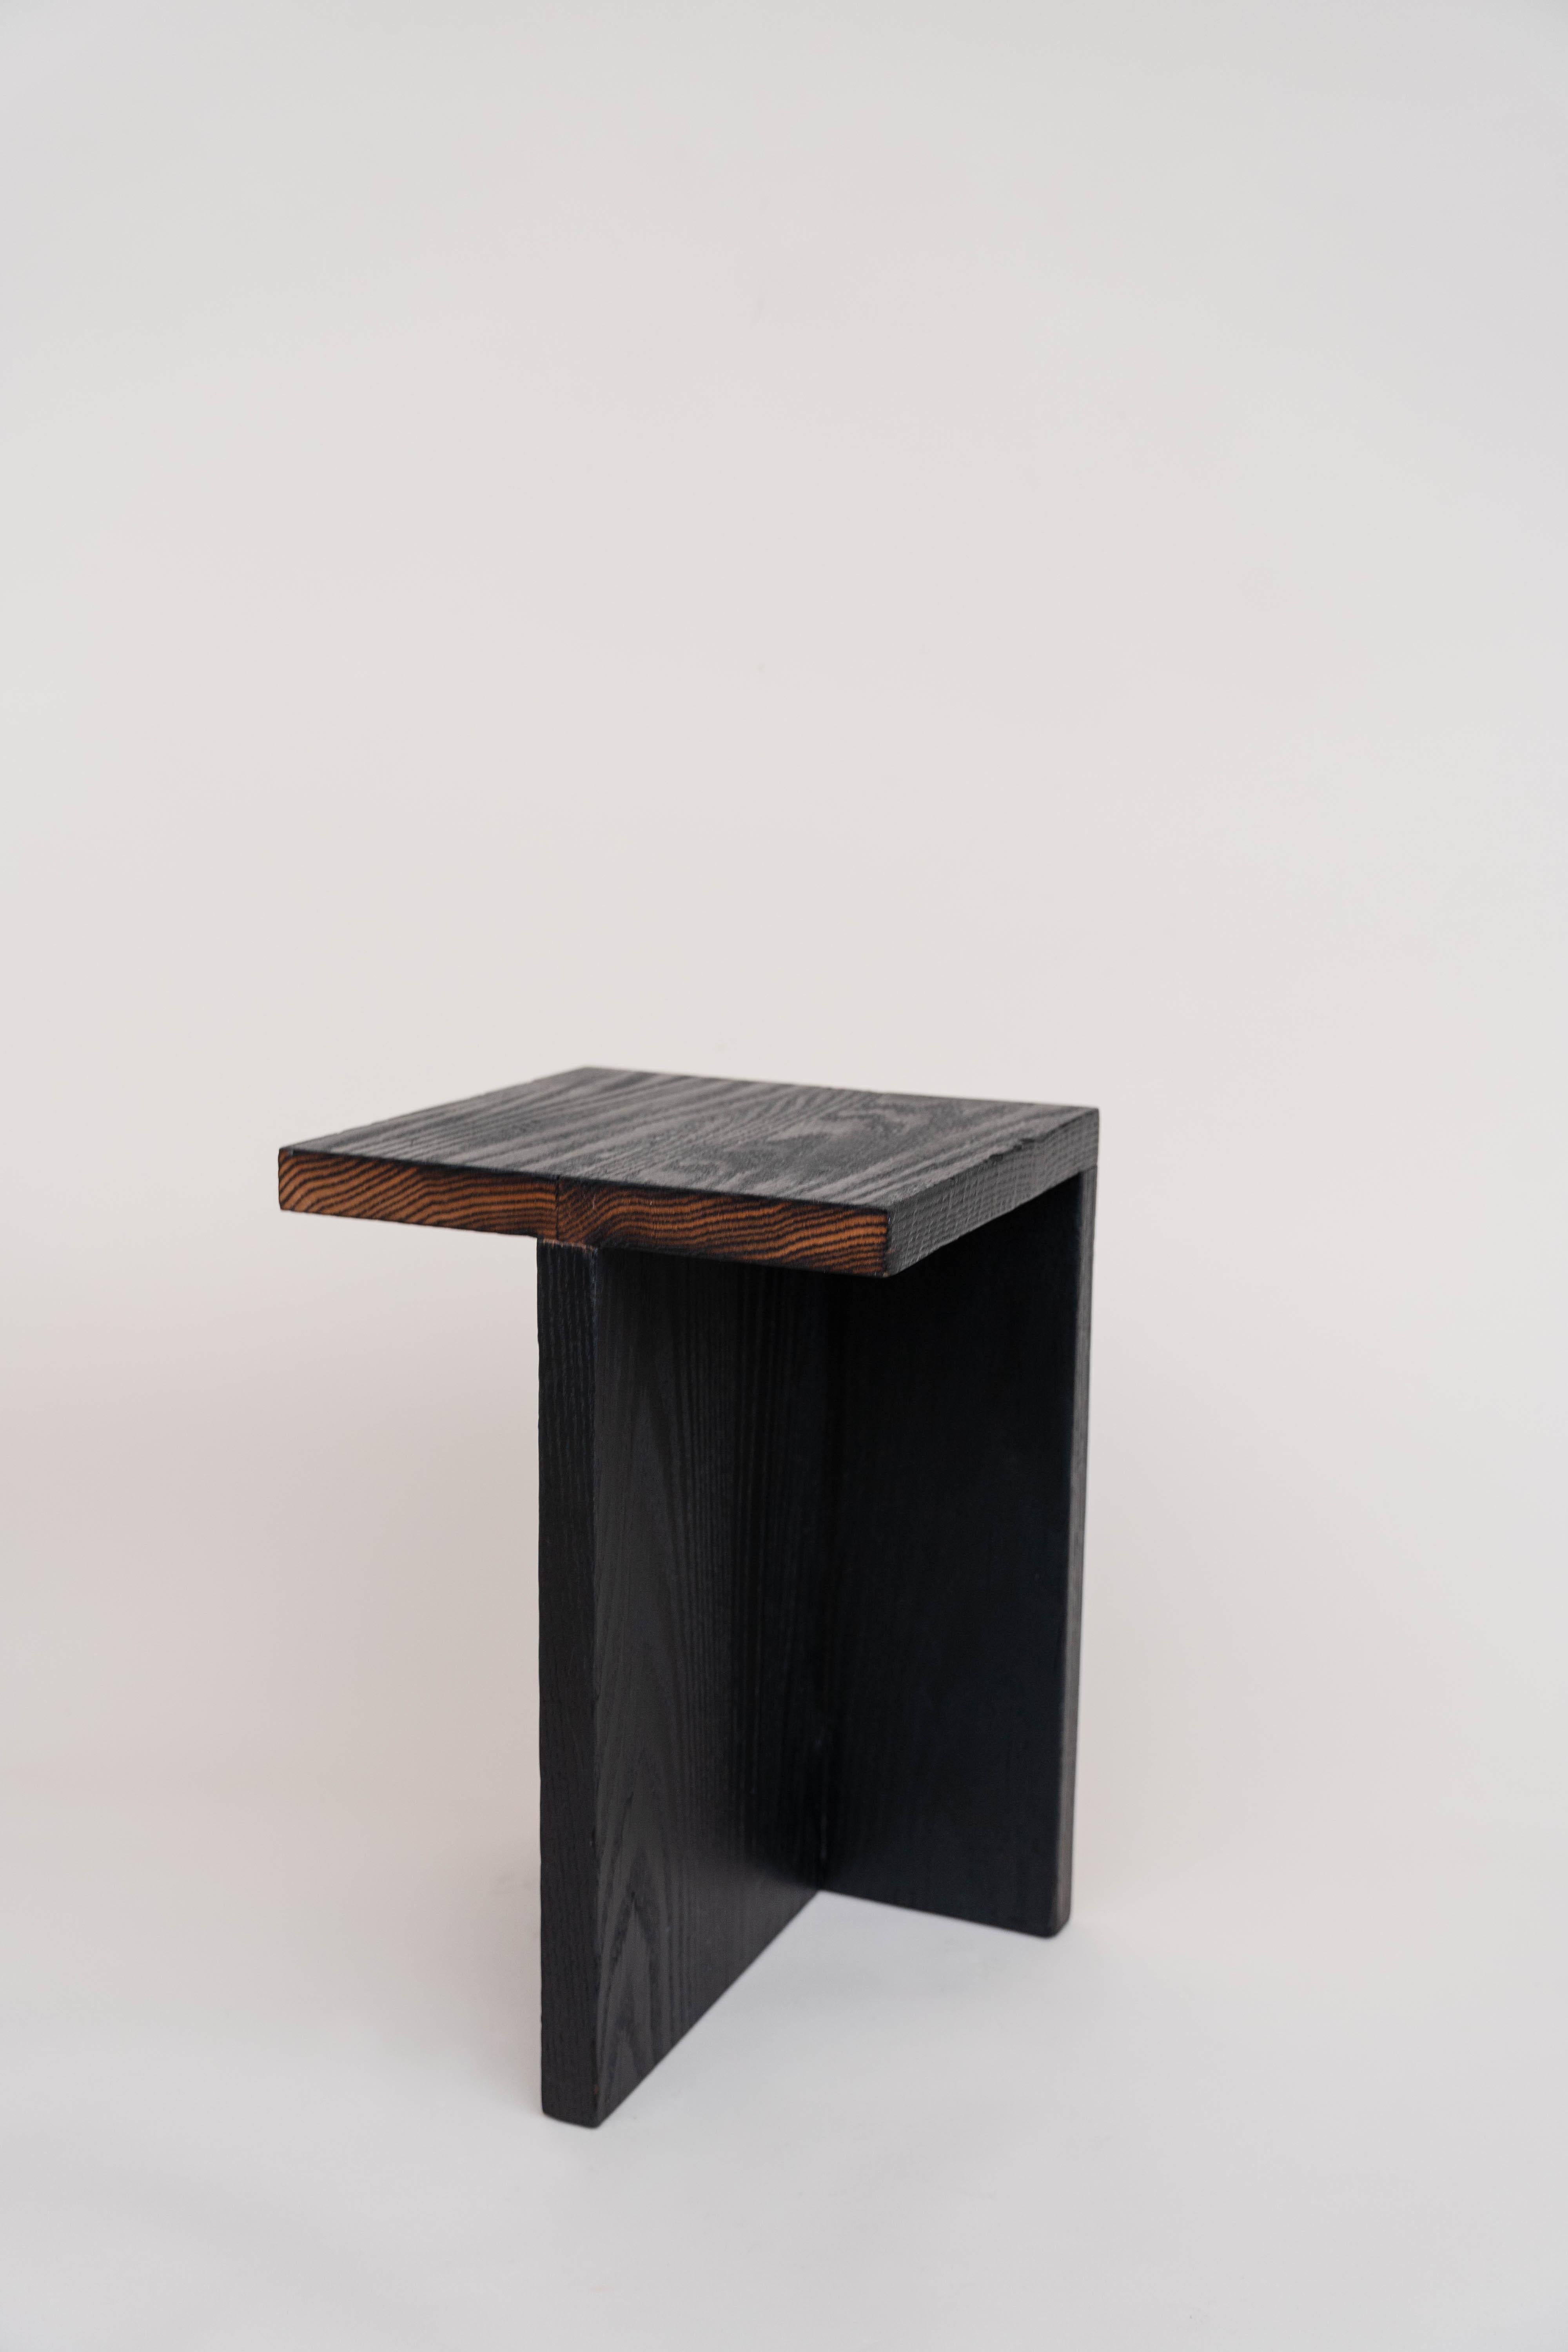 Burnt oak stool by Daniel Elkayam
Edition of 3
Dimensions: D 30 x W 30 x H 45 cm
Materials: Oak Wood

The Charred Collection
A collection of handmade wooden objects inspired by one of the most powerful natural phenomena in our world, which is out of